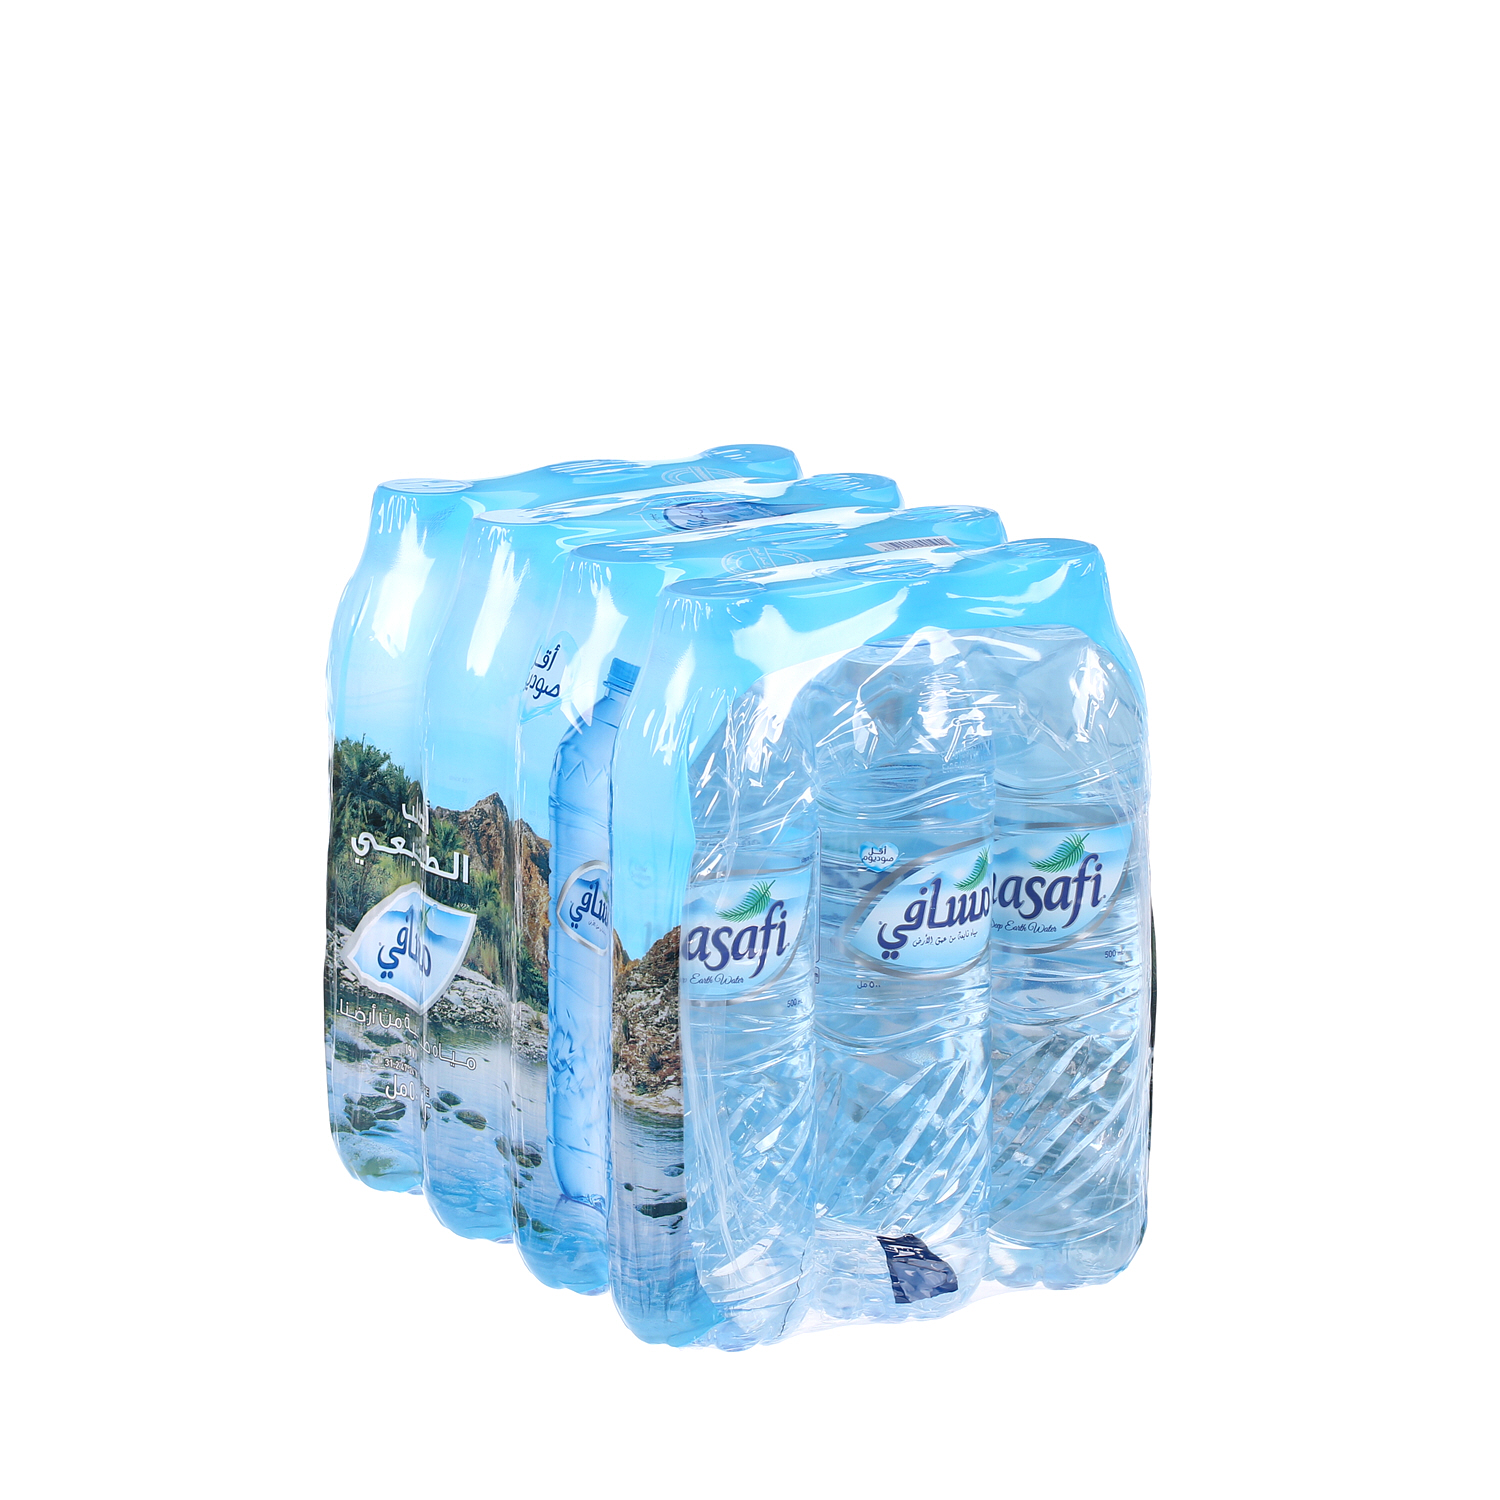 Masafi Mineral Water 500 ml × 12 Pack